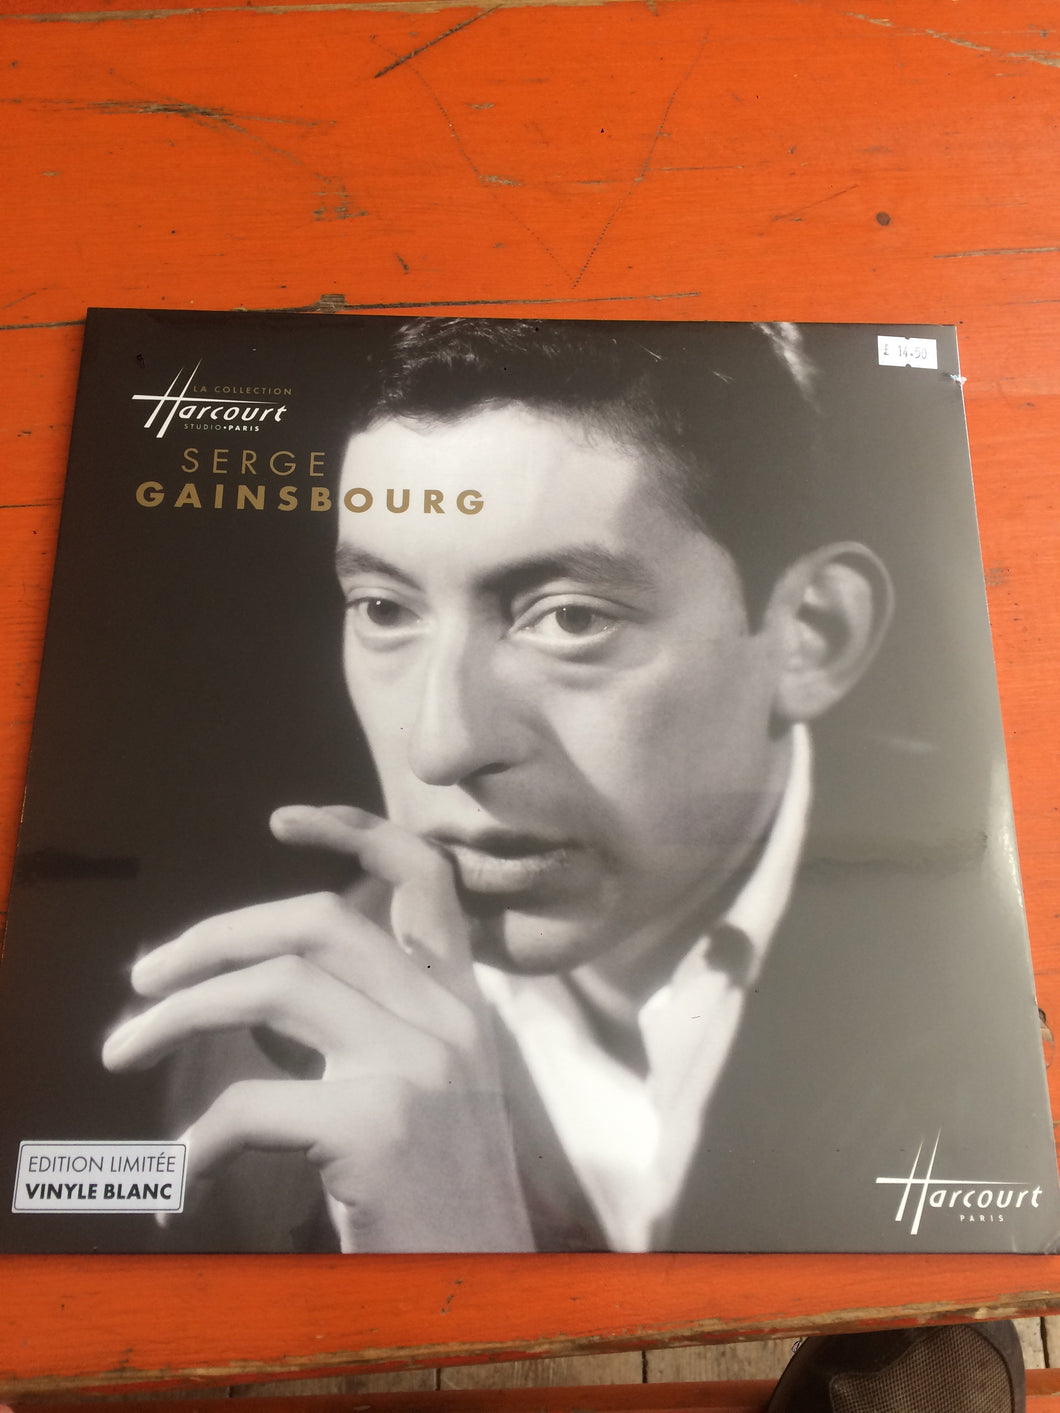 Serge Gainsbourg - Harcourt Collection